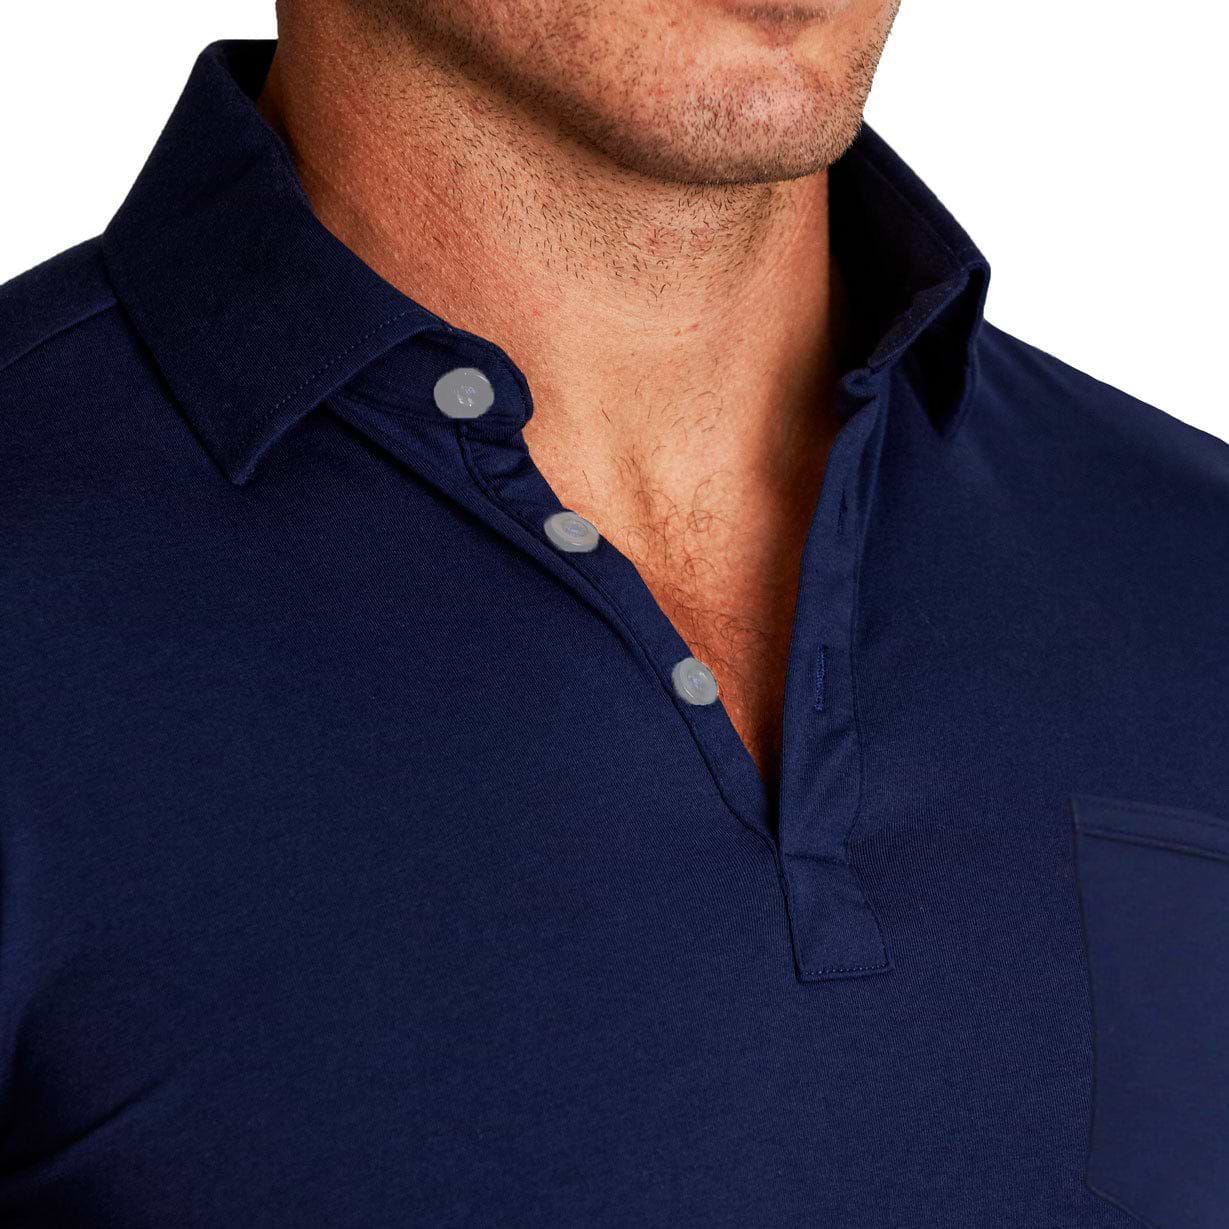 "The Quick" Navy on Navy Polo